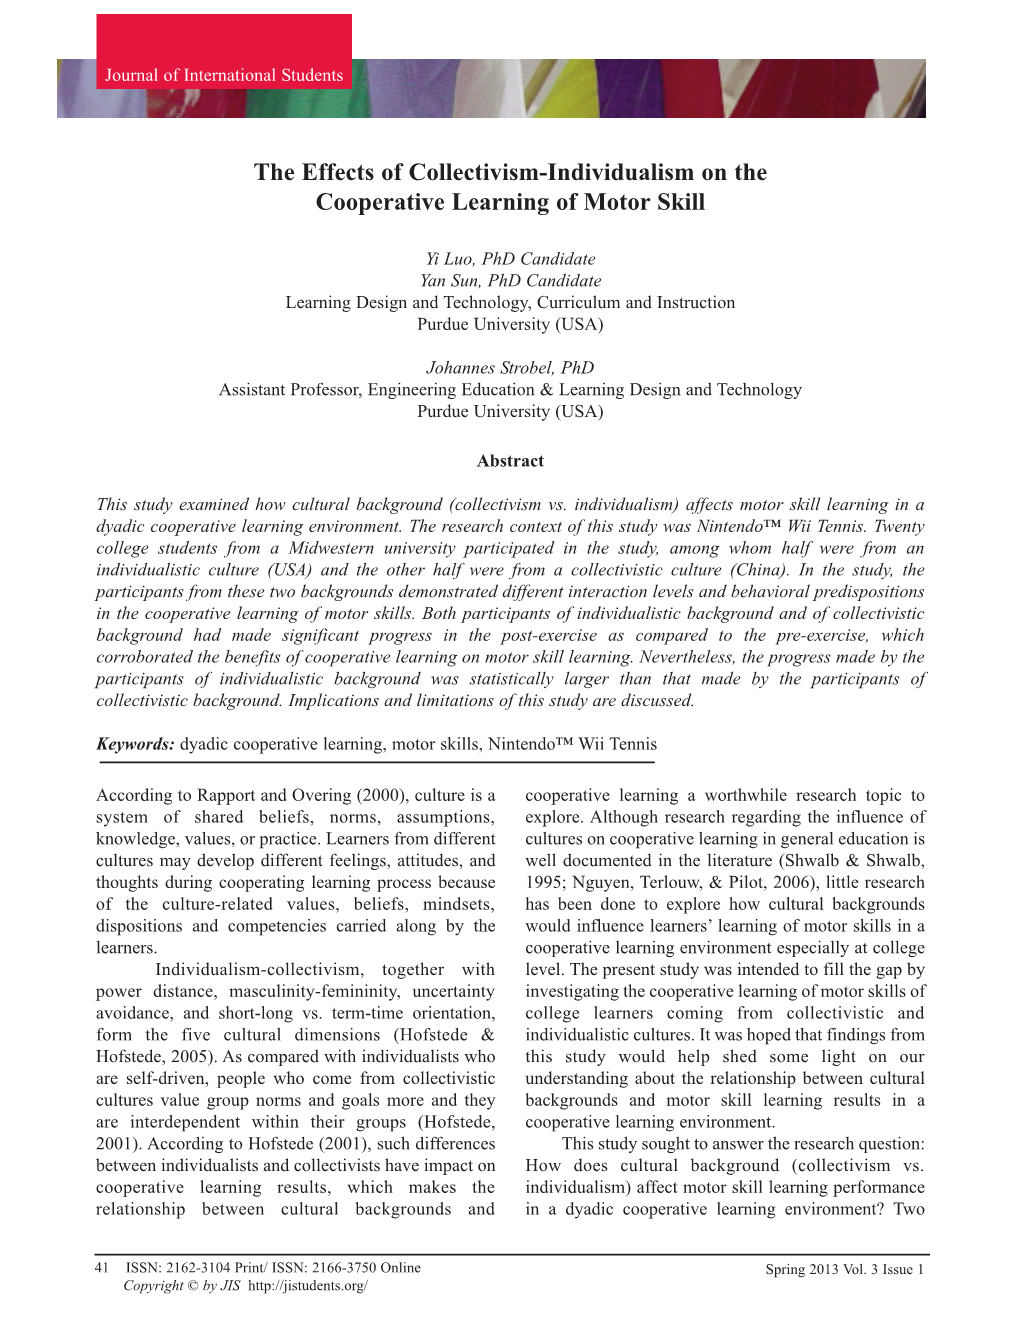 The Effects of Collectivism-Individualism on the Cooperative Learning of Motor Skill